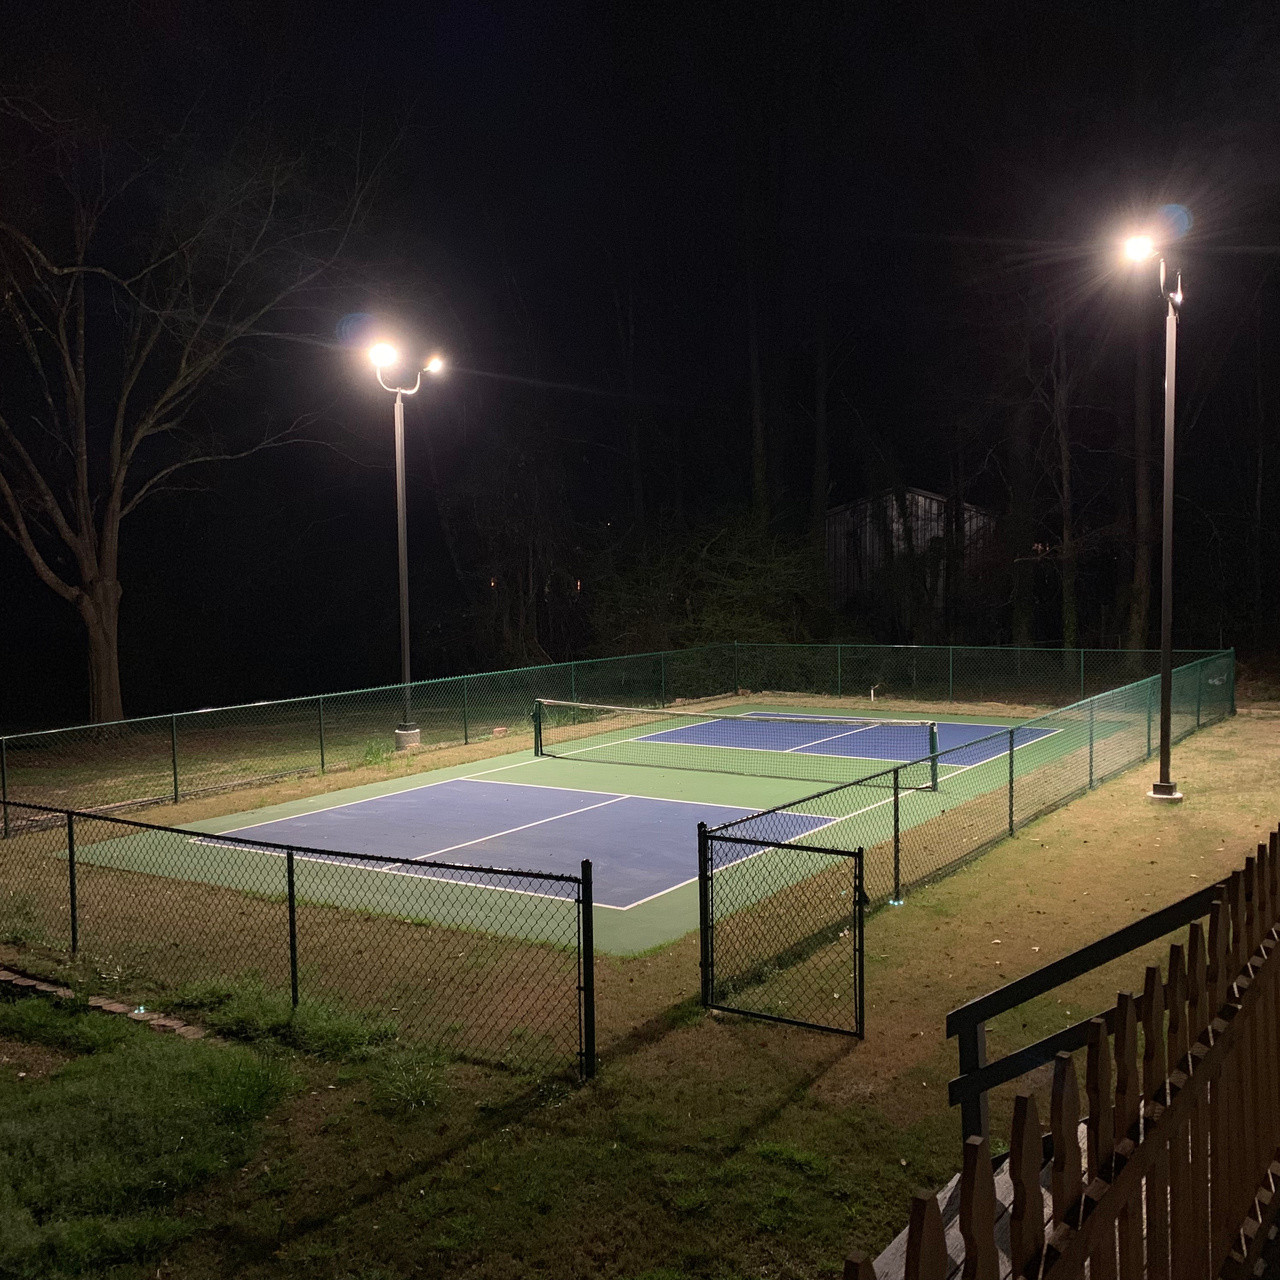 How To Make Your Own Pickleball Court - Tennis To Pickleball Court ...